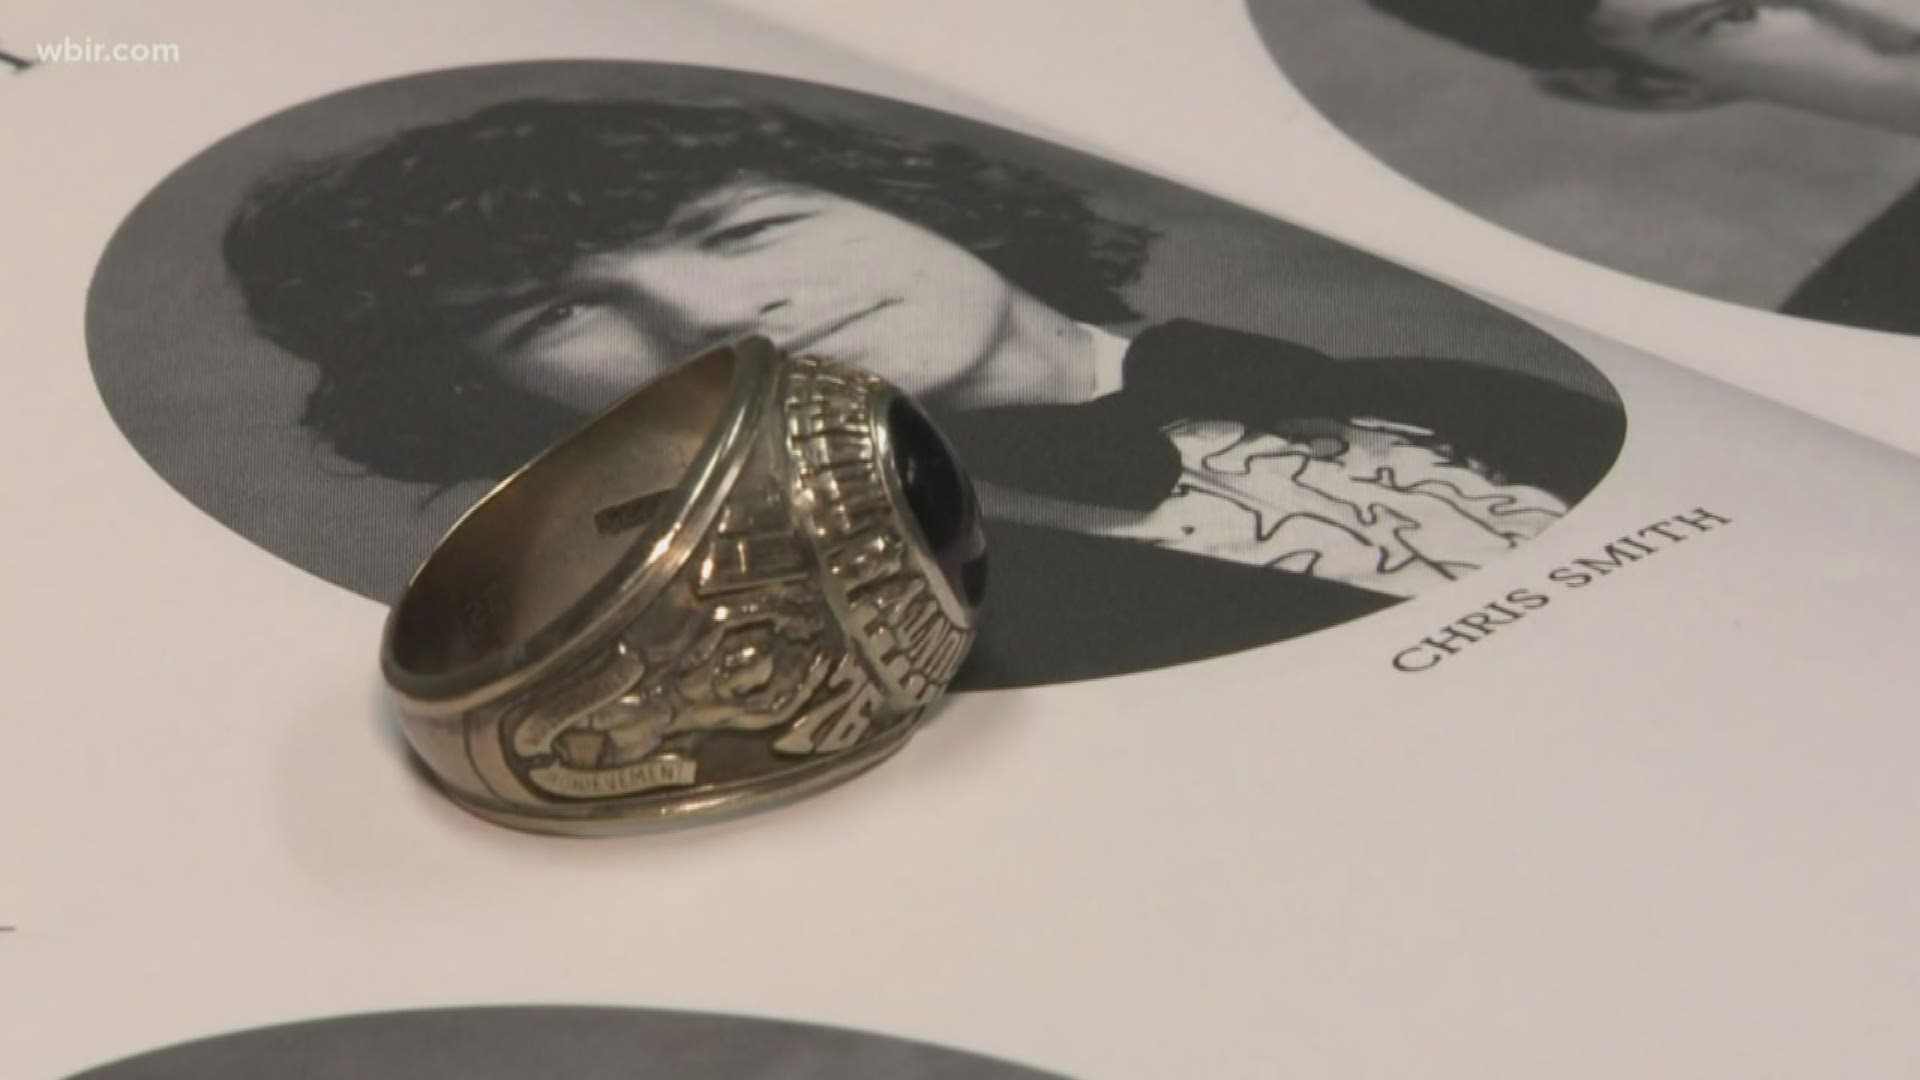 He lost his class ring the summer after high school graduation and wondered where it was.